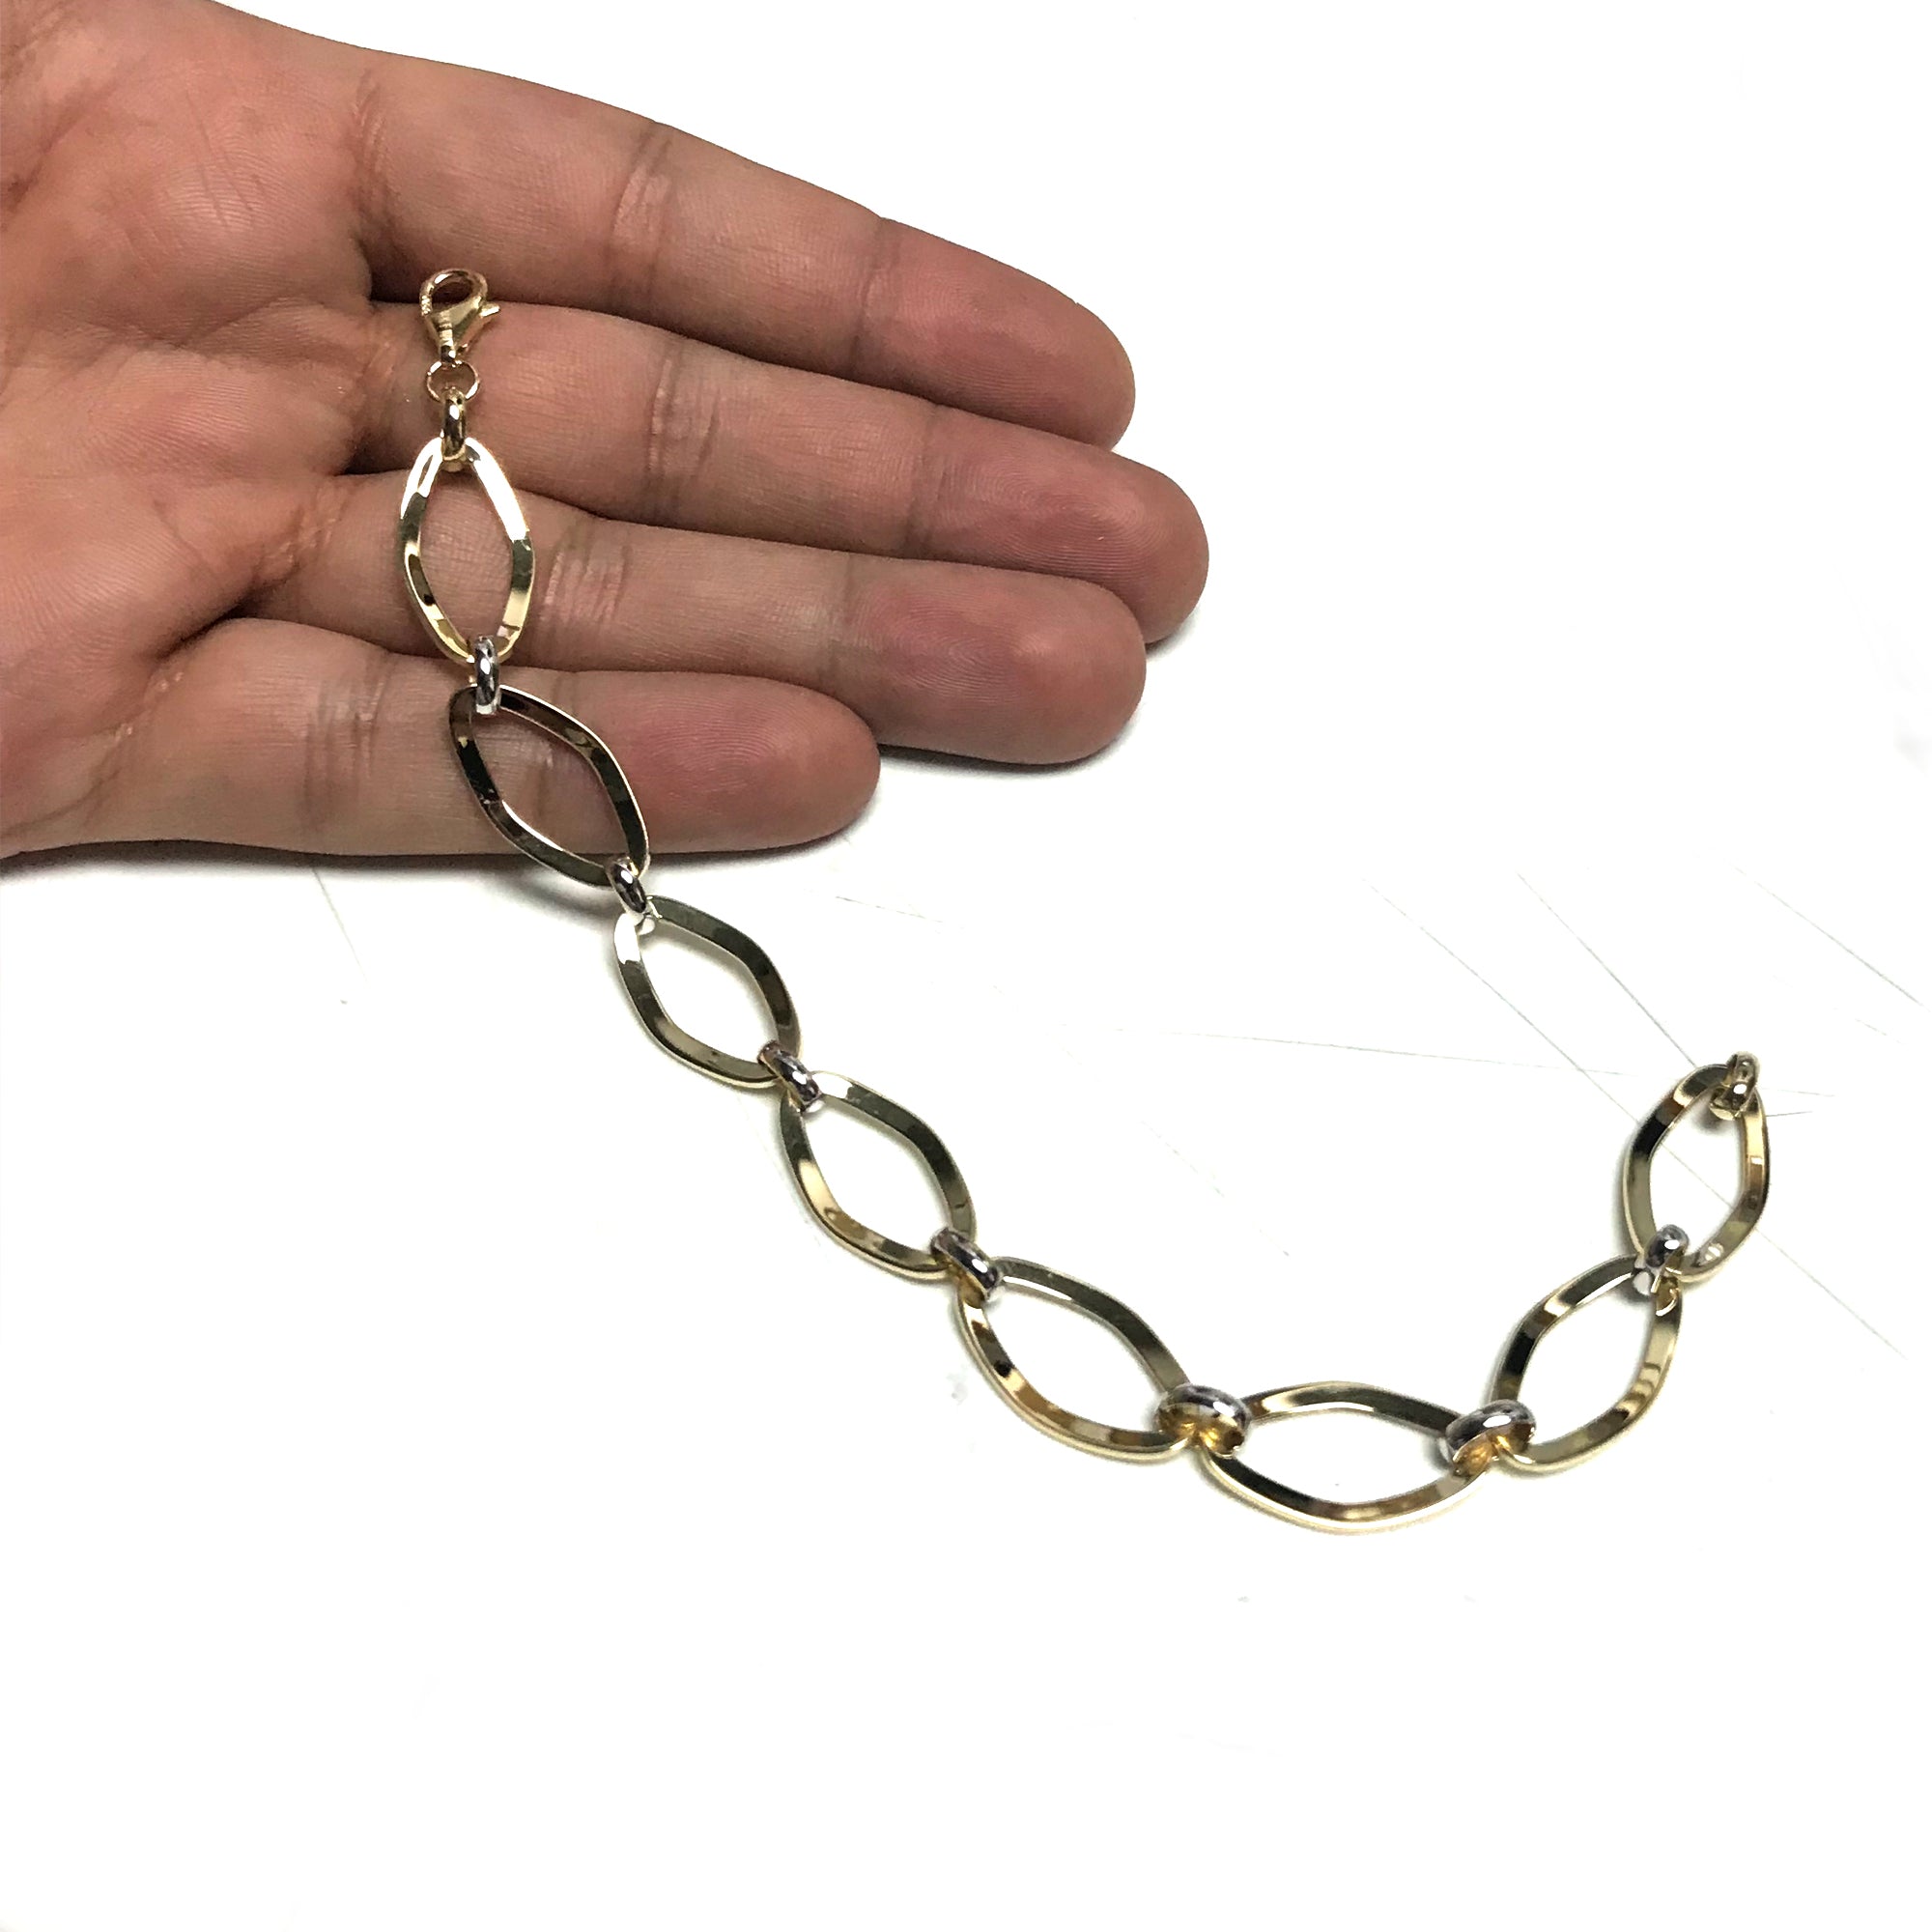 14k White And Yellow Gold Marquise Link Womens Bracelet, 7.75"